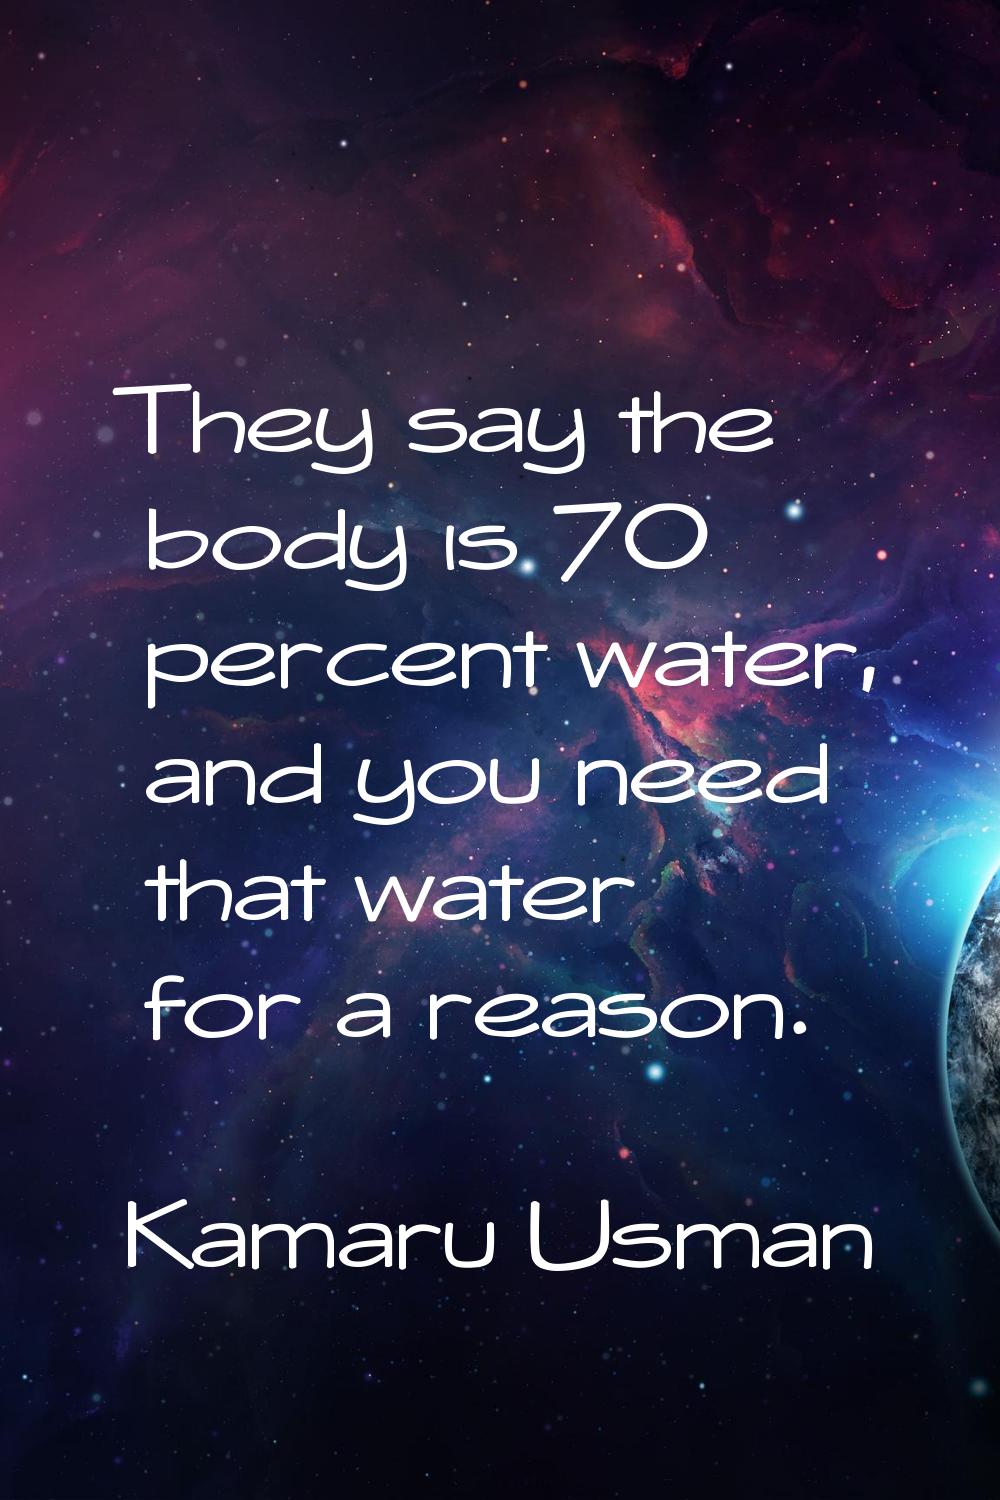 They say the body is 70 percent water, and you need that water for a reason.